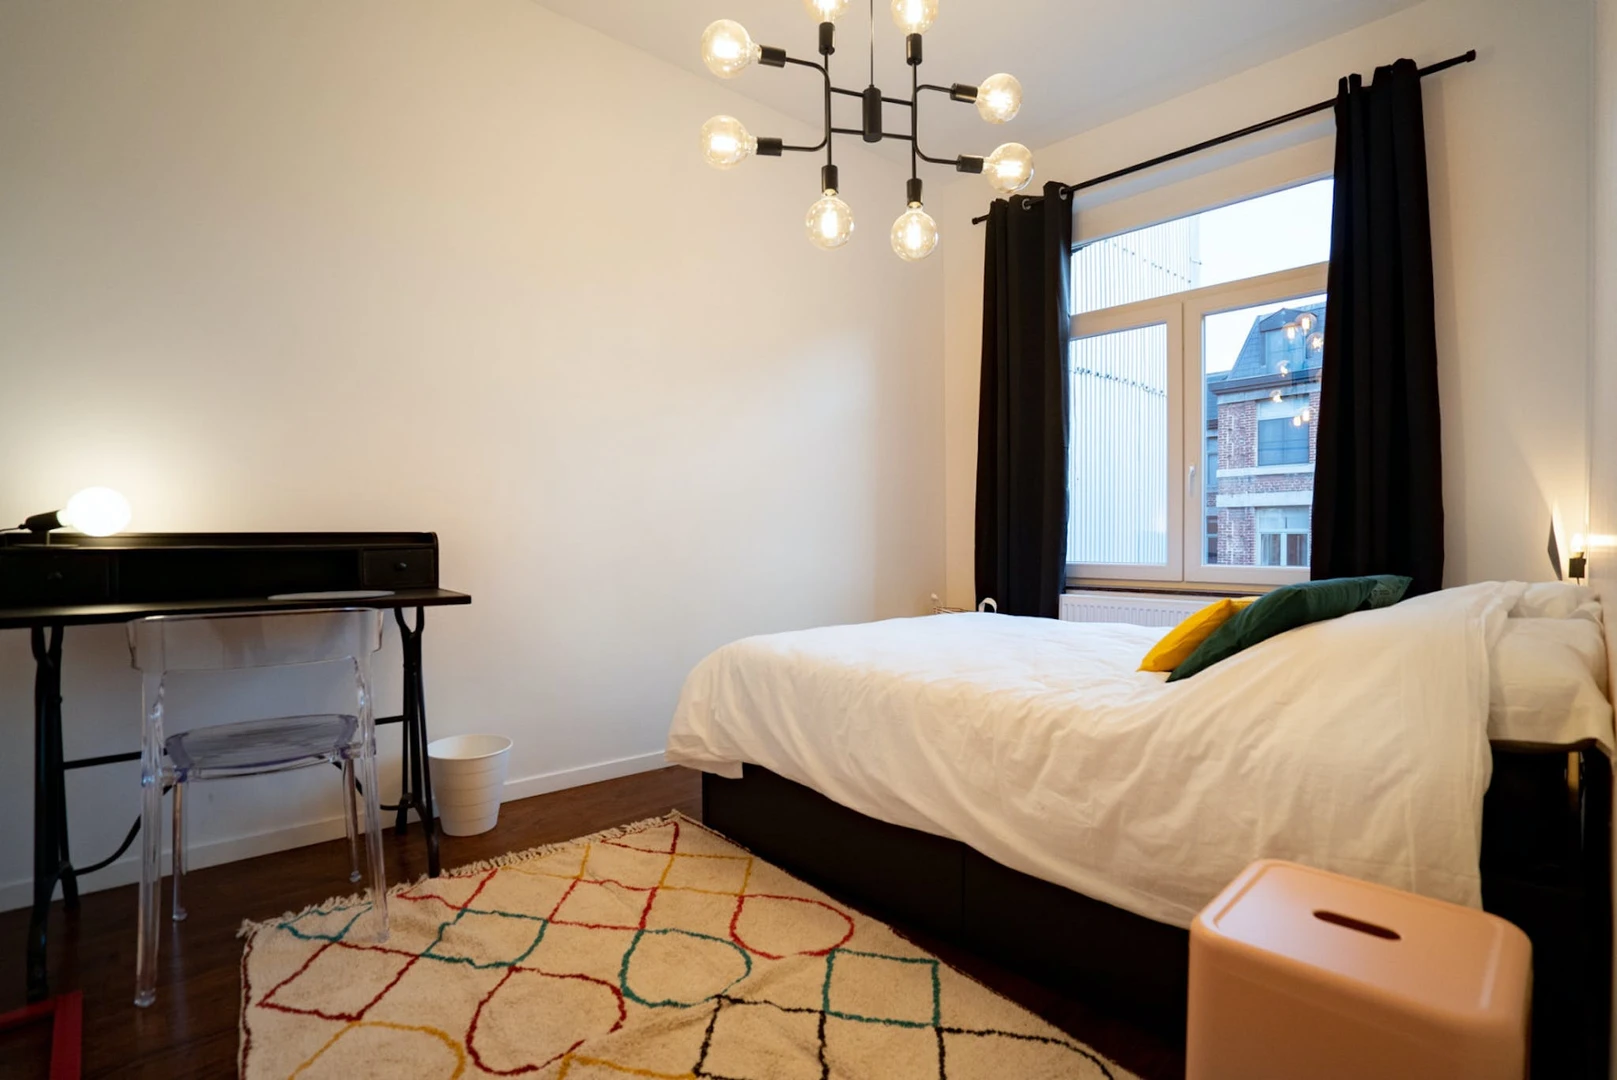 Renting rooms by the month in Liège